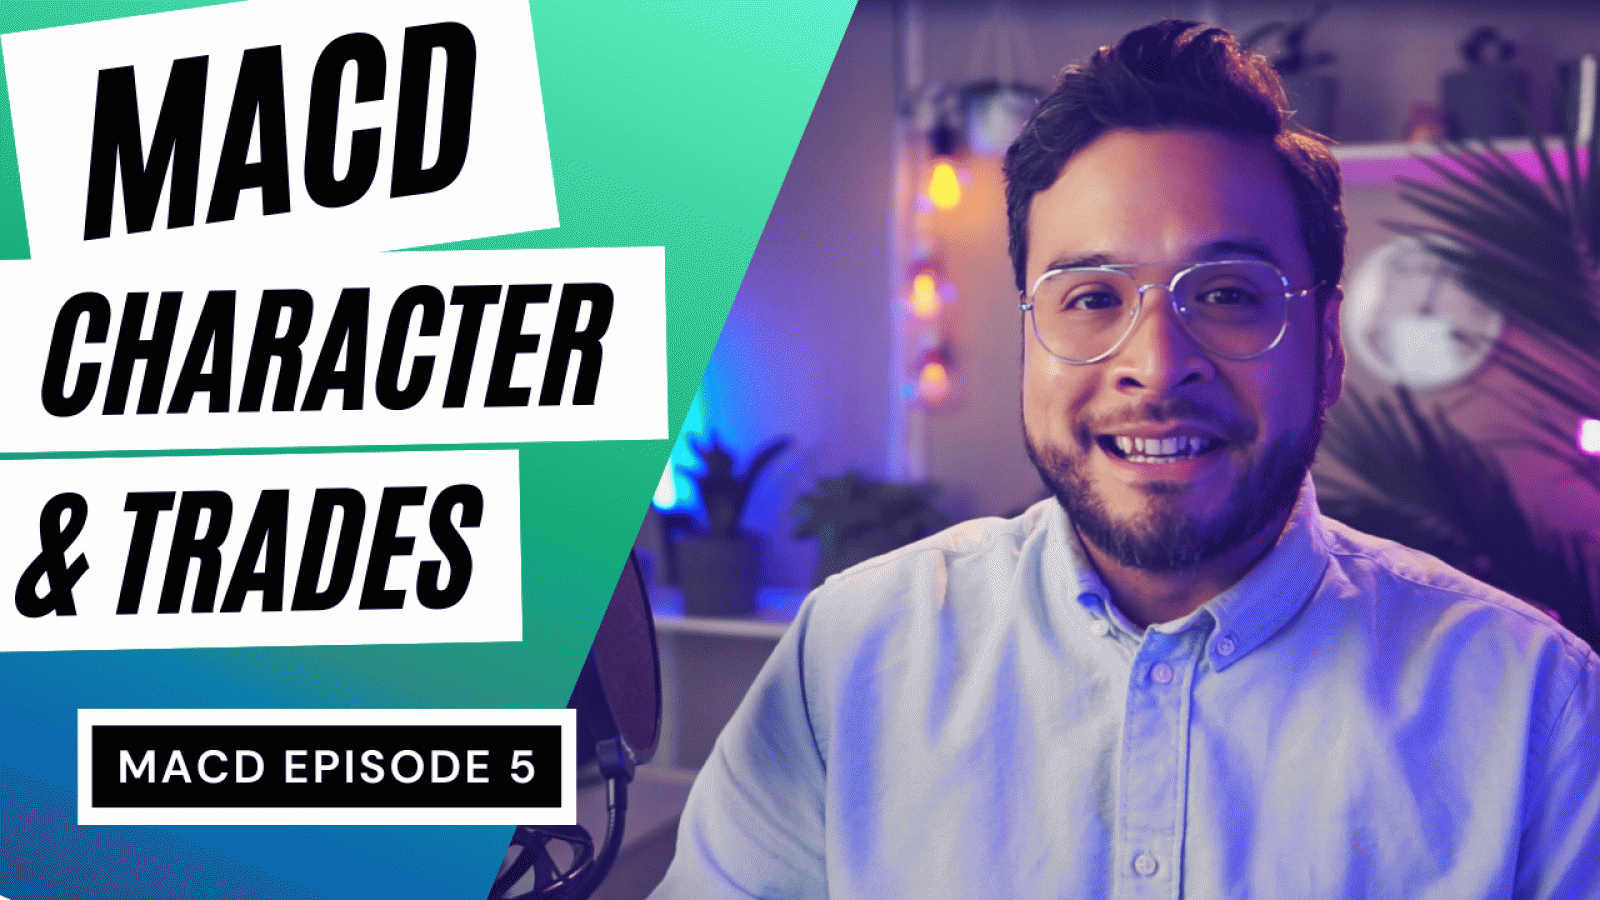 MACD Episode 5 MACD Character and Trades